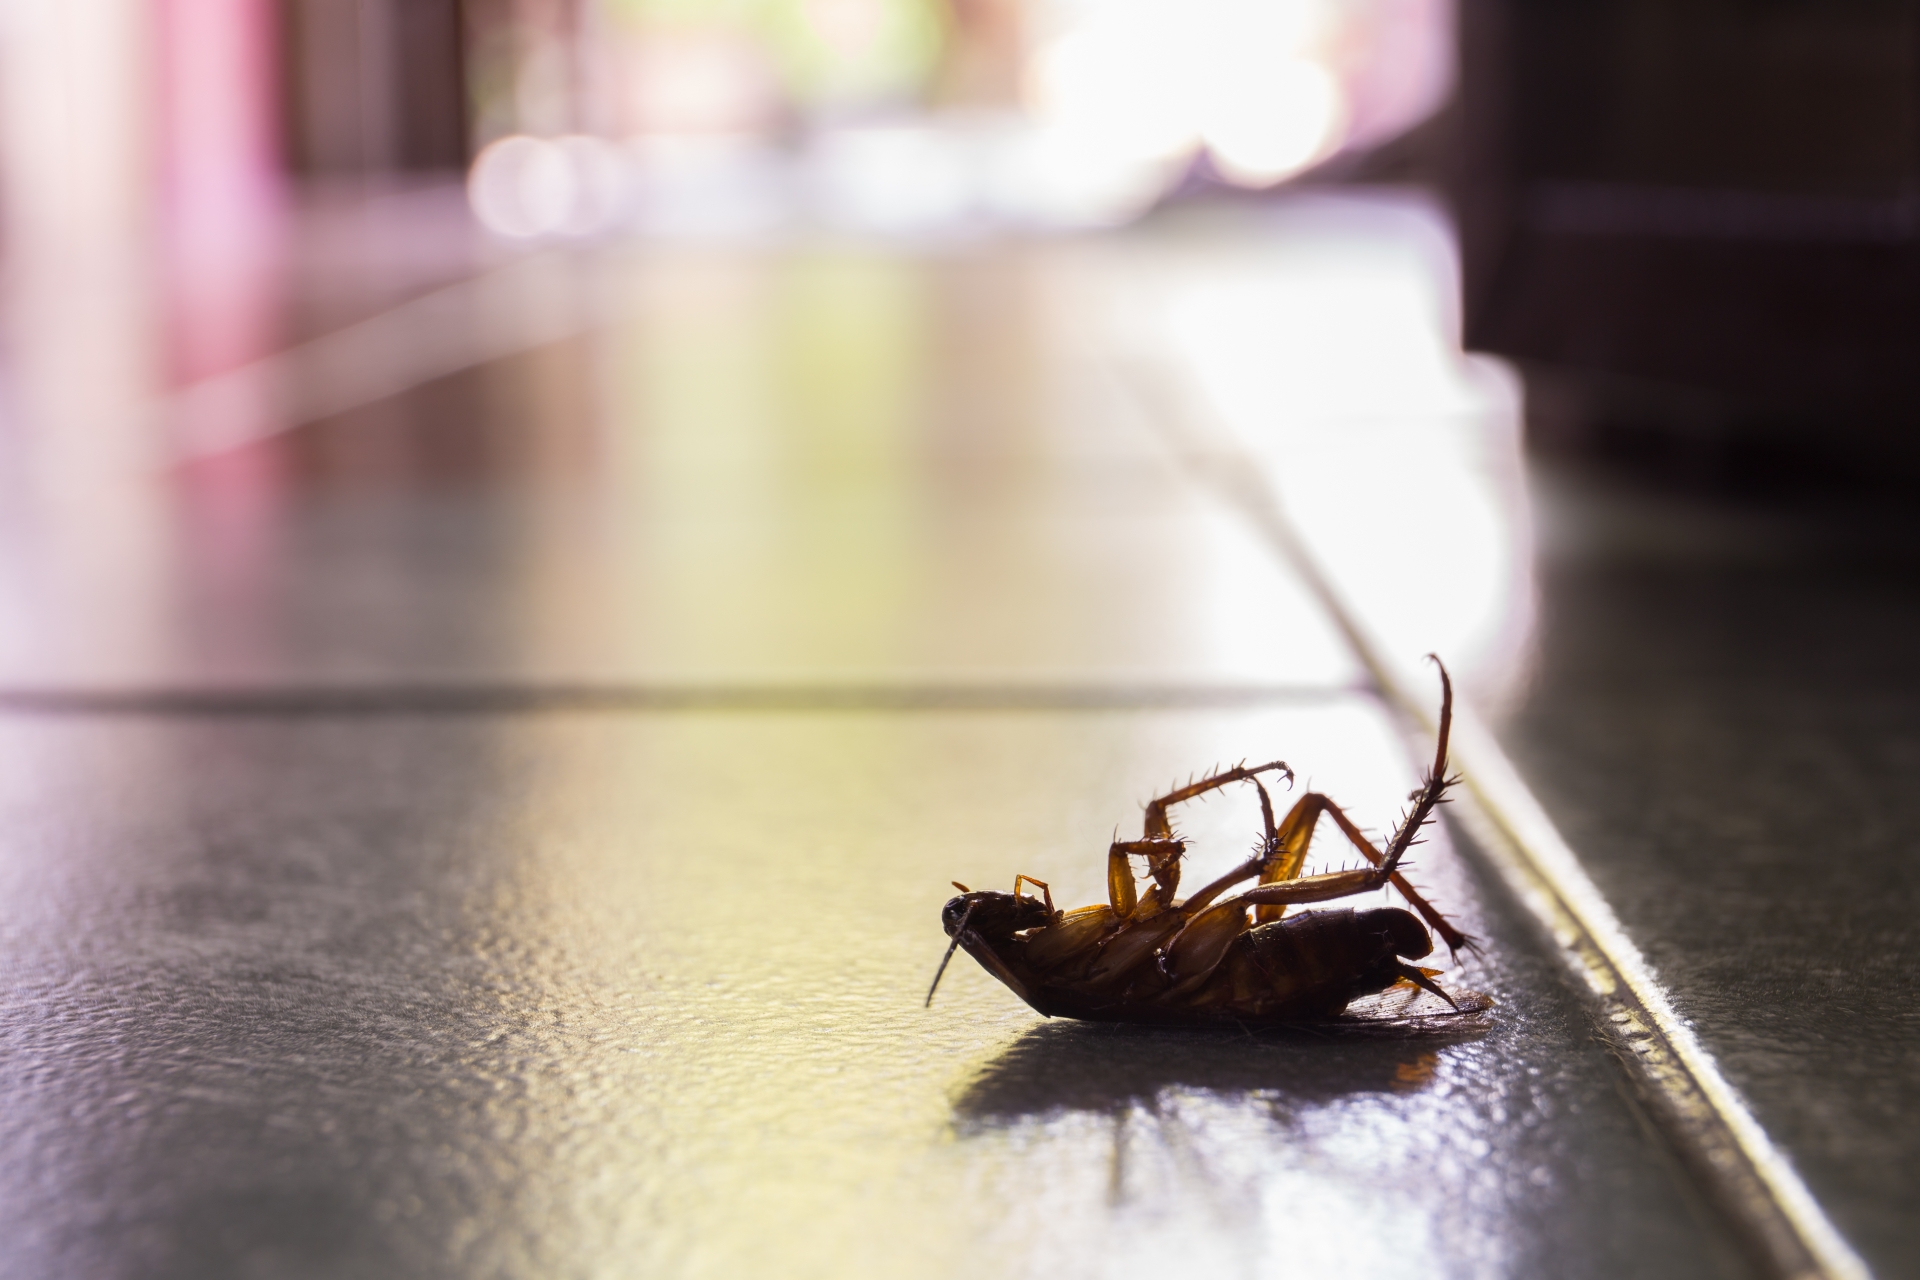 Cockroach Control, Pest Control in Merton, SW19. Call Now 020 8166 9746